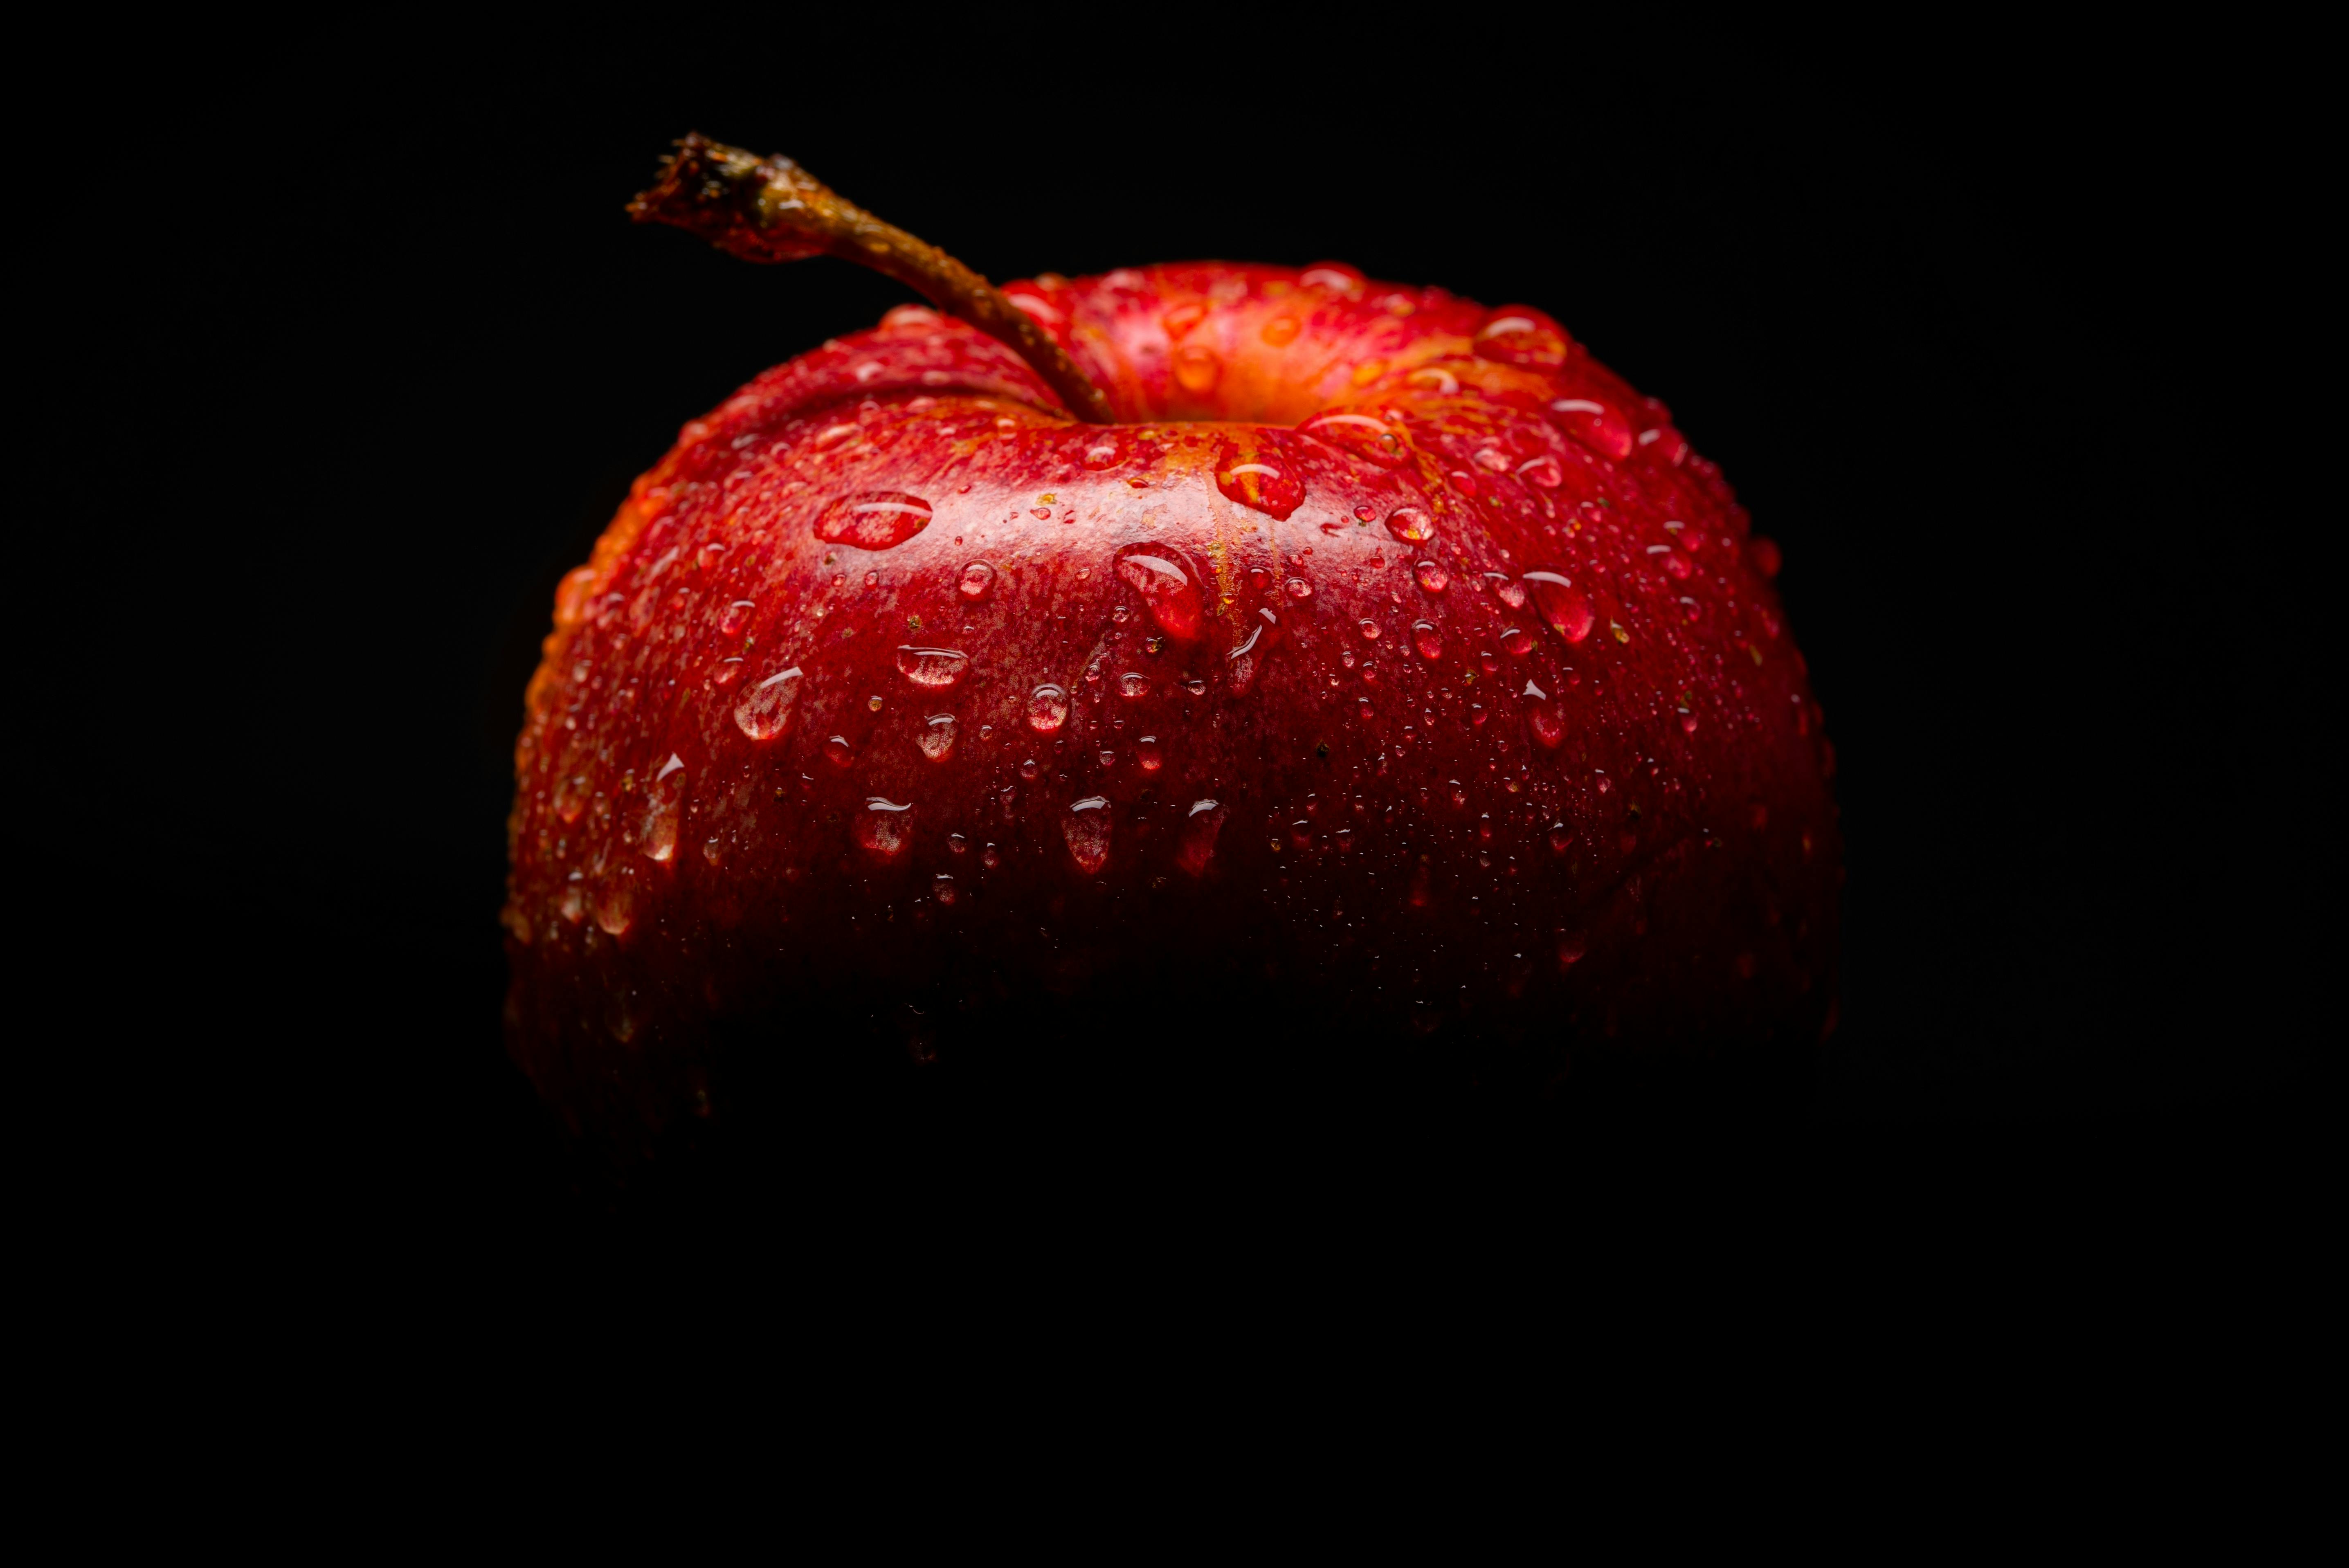 Red Apple Fruit With Black Background · Free Stock Photo